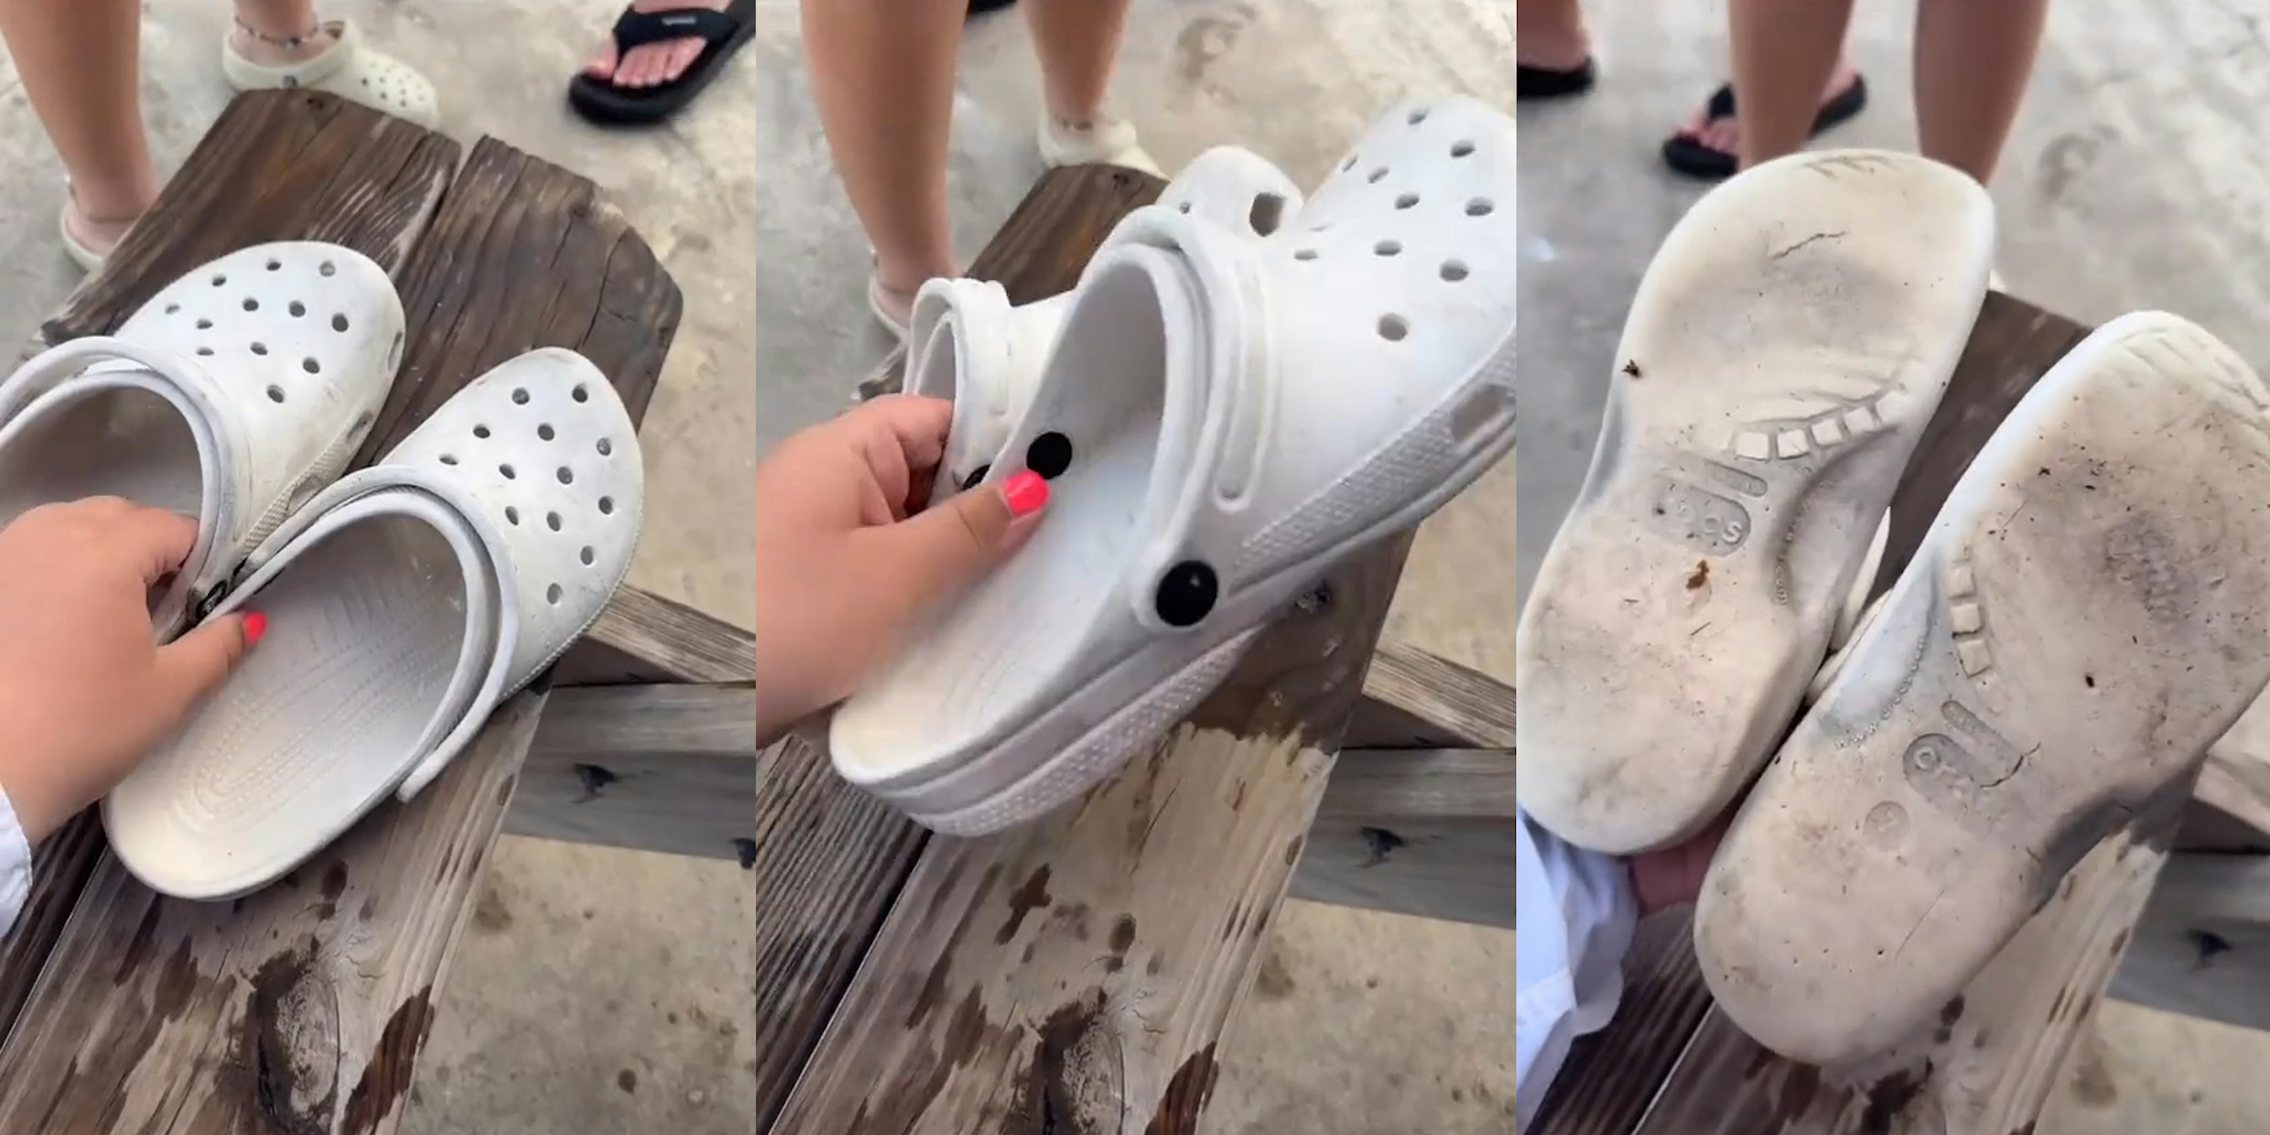 pair of white crocs in hand over wooden bench (l) hand picking up pair of white crocs in hand over wooden bench (c) hands holding pair of white crocs in hand over wooden bench upside down (r)